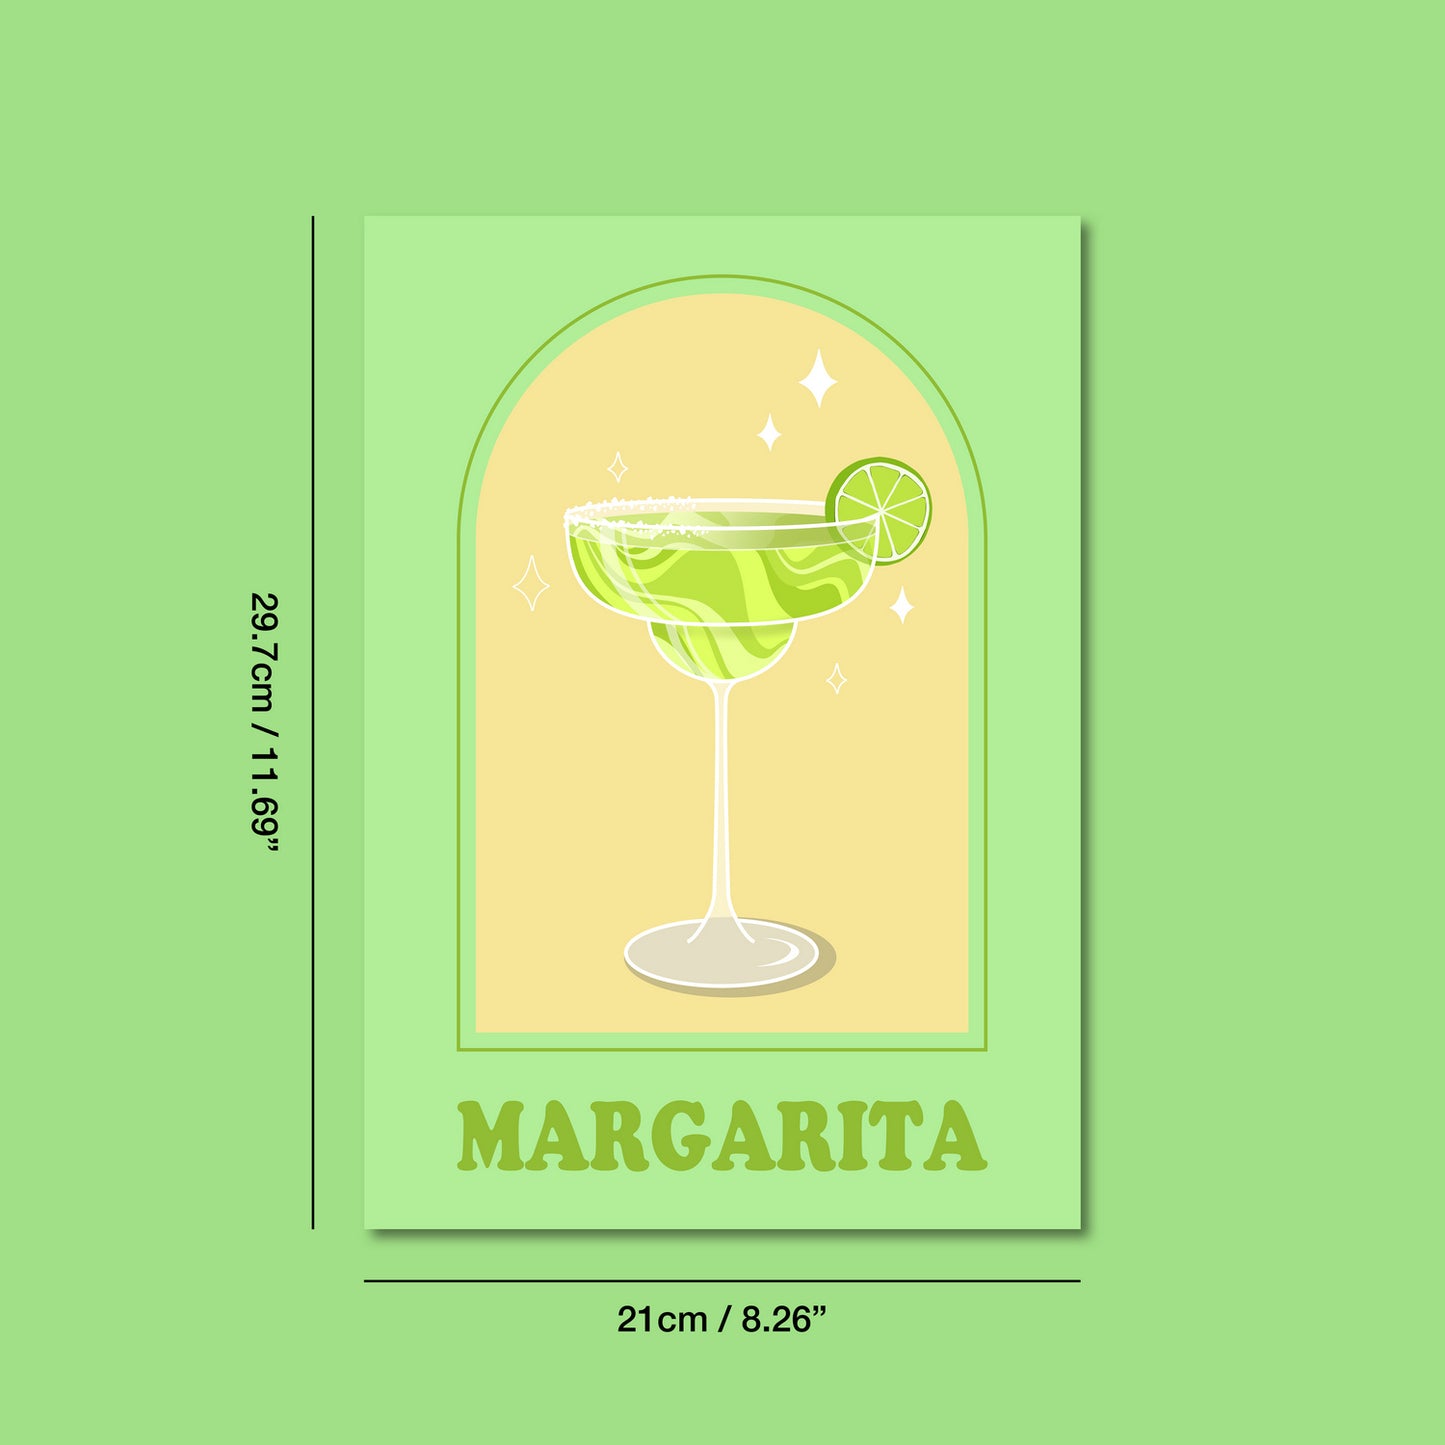 Margarita Art Print by Cocktail Critters